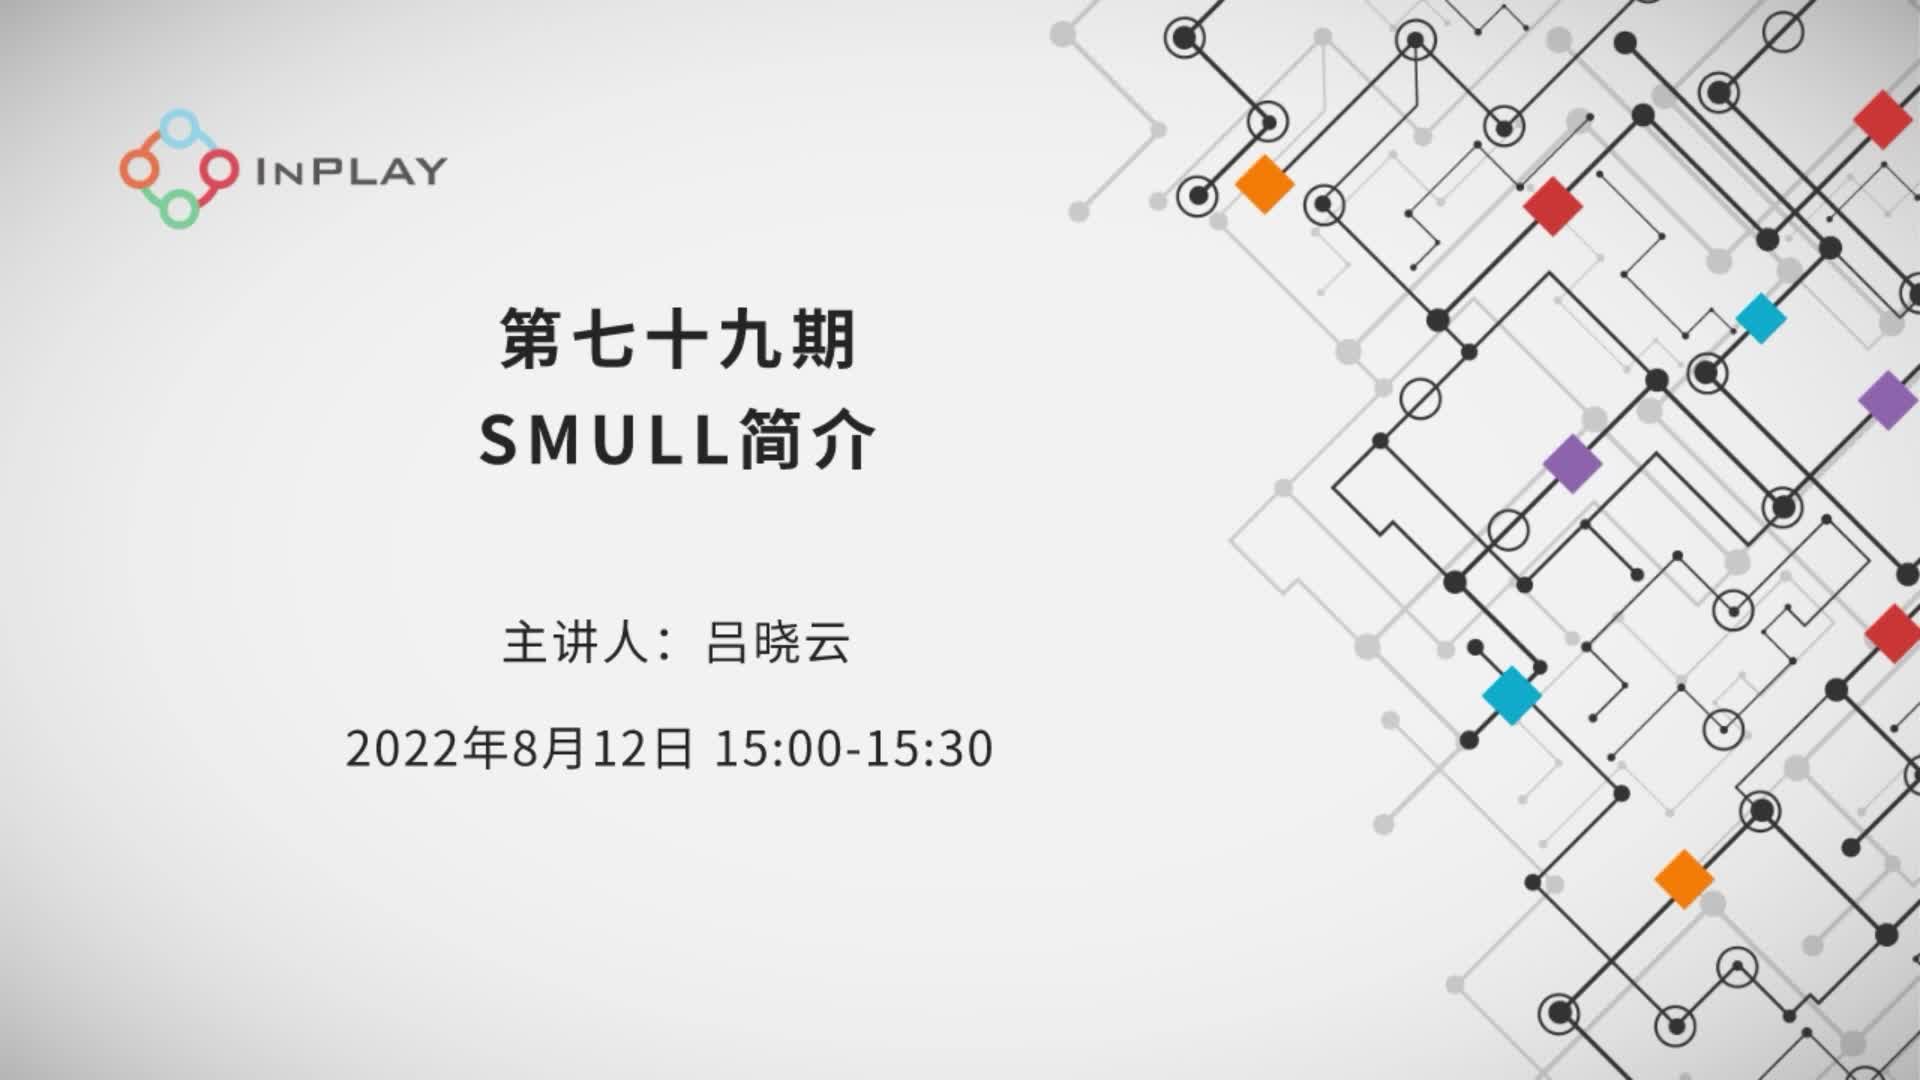 SMULL简介